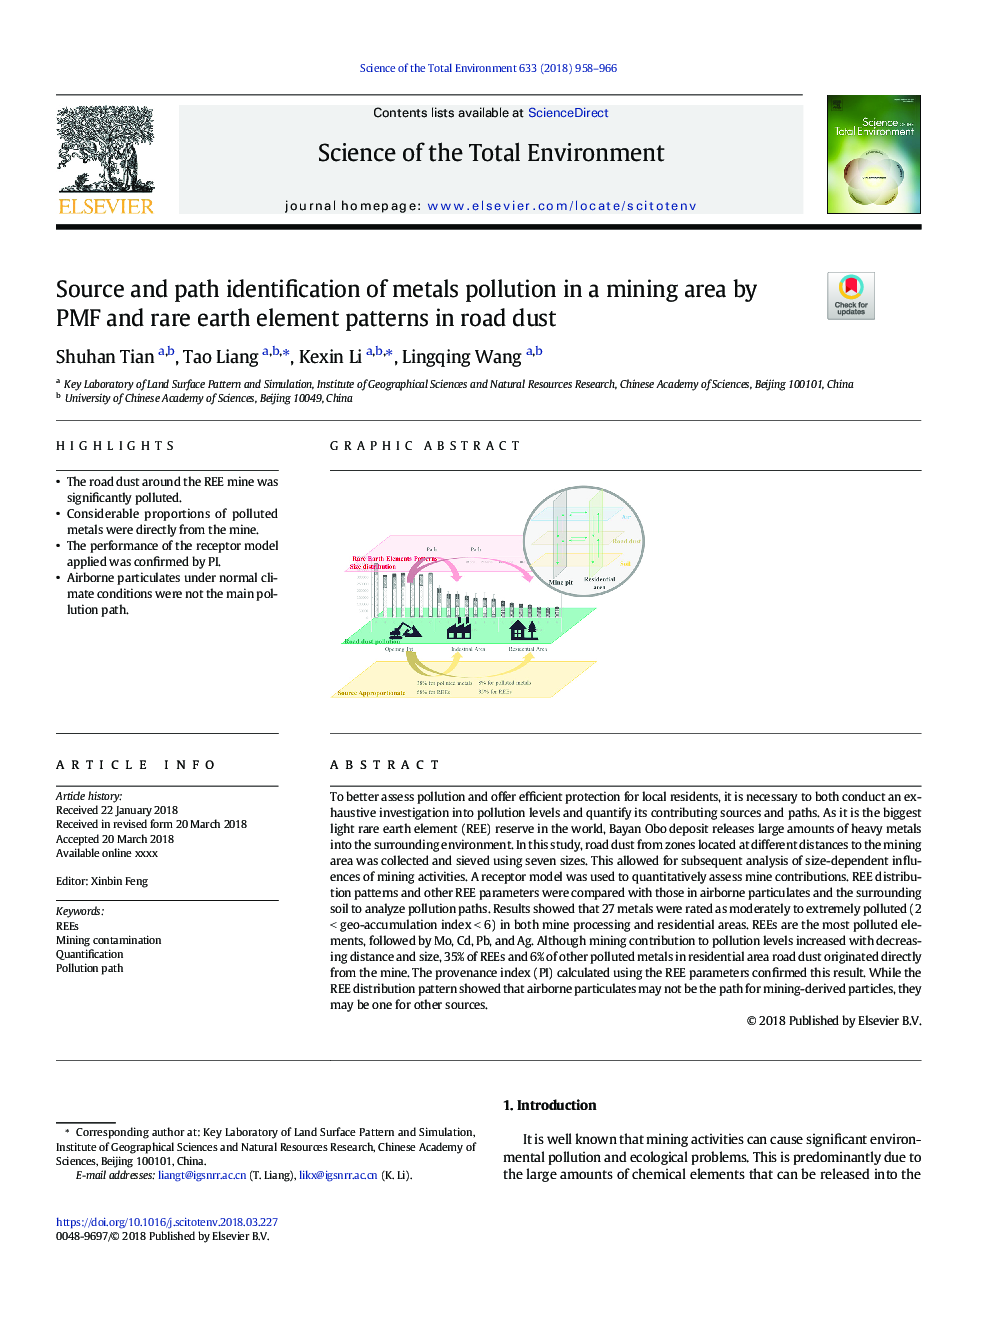 Source and path identification of metals pollution in a mining area by PMF and rare earth element patterns in road dust